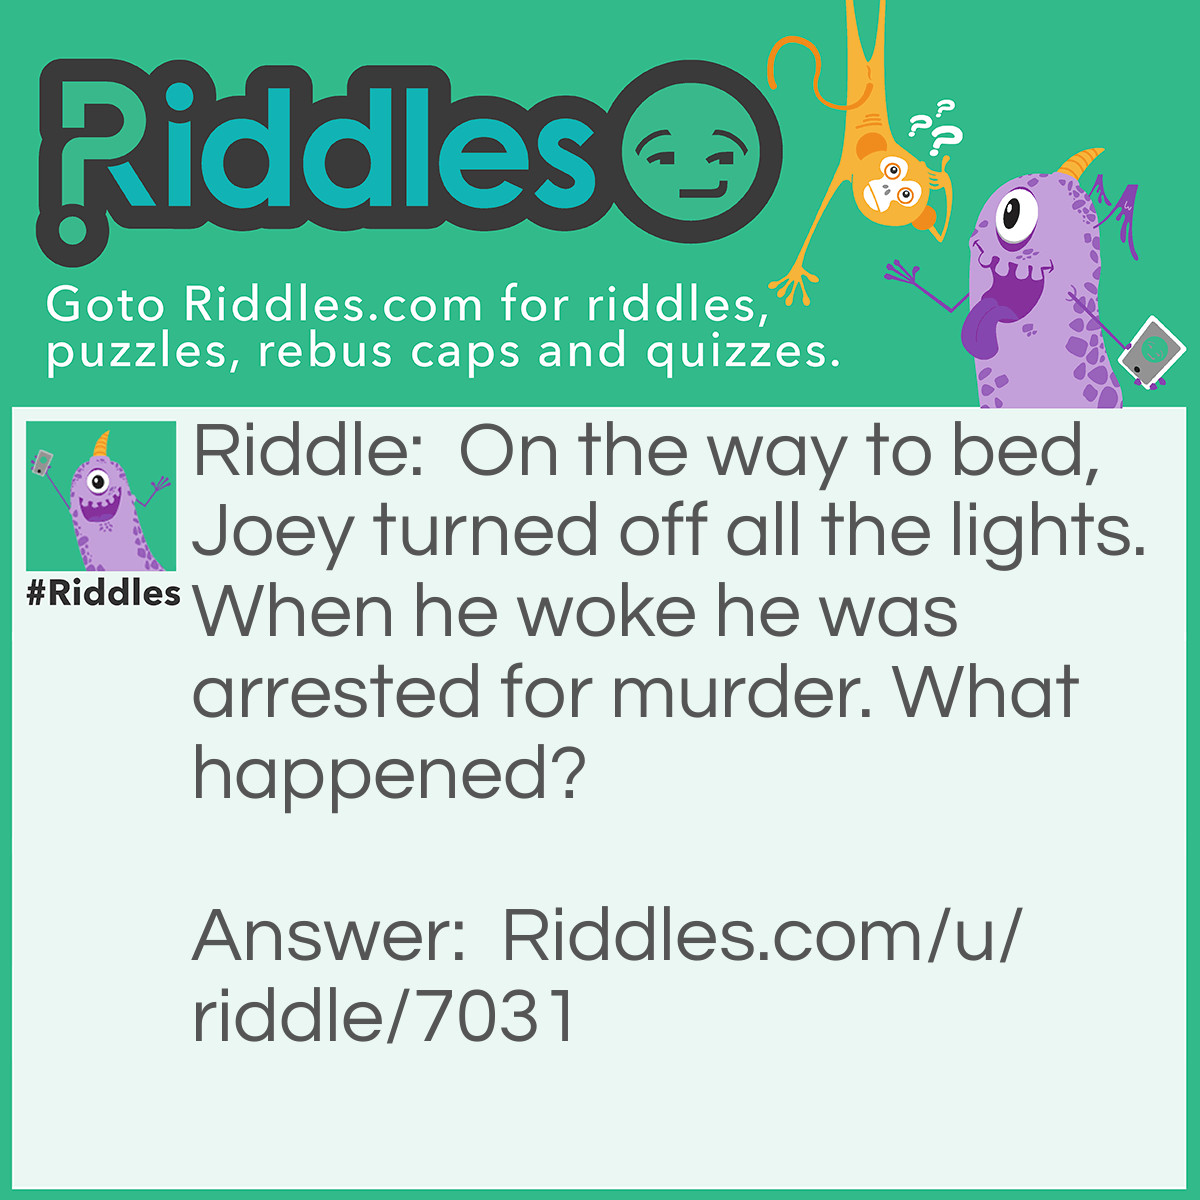 Riddle: On the way to bed, Joey turned off all the lights. When he woke he was arrested for murder. What happened? Answer: He was at the lighthouse left it to sleep and turned off the light there and boats crashed